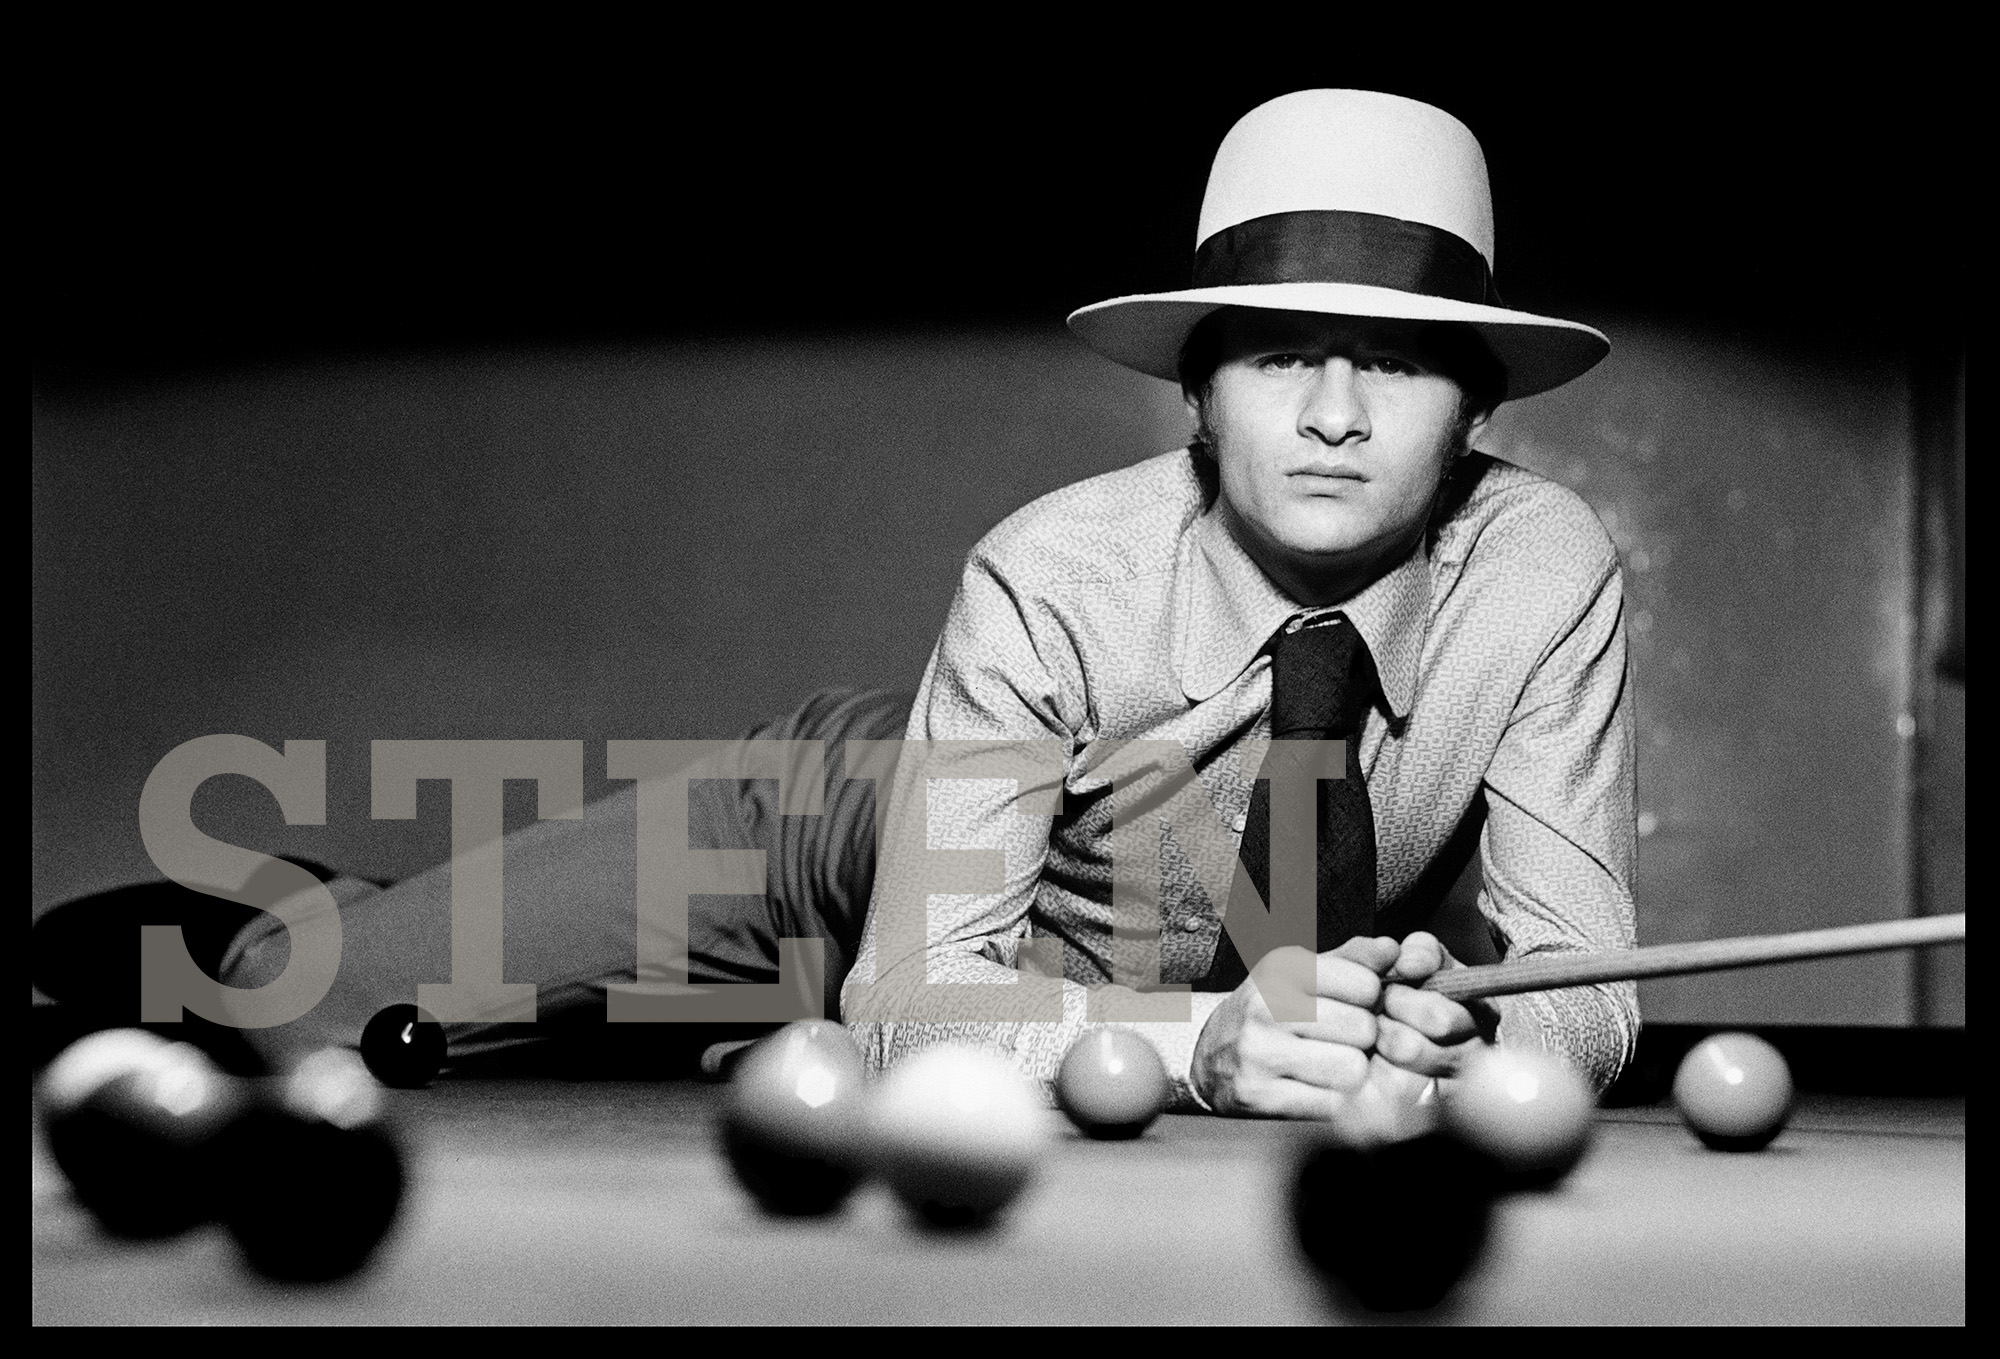 an exclusive black and white photograph of alex hurricane higgins leaning across a snooker table by british photographer david steen